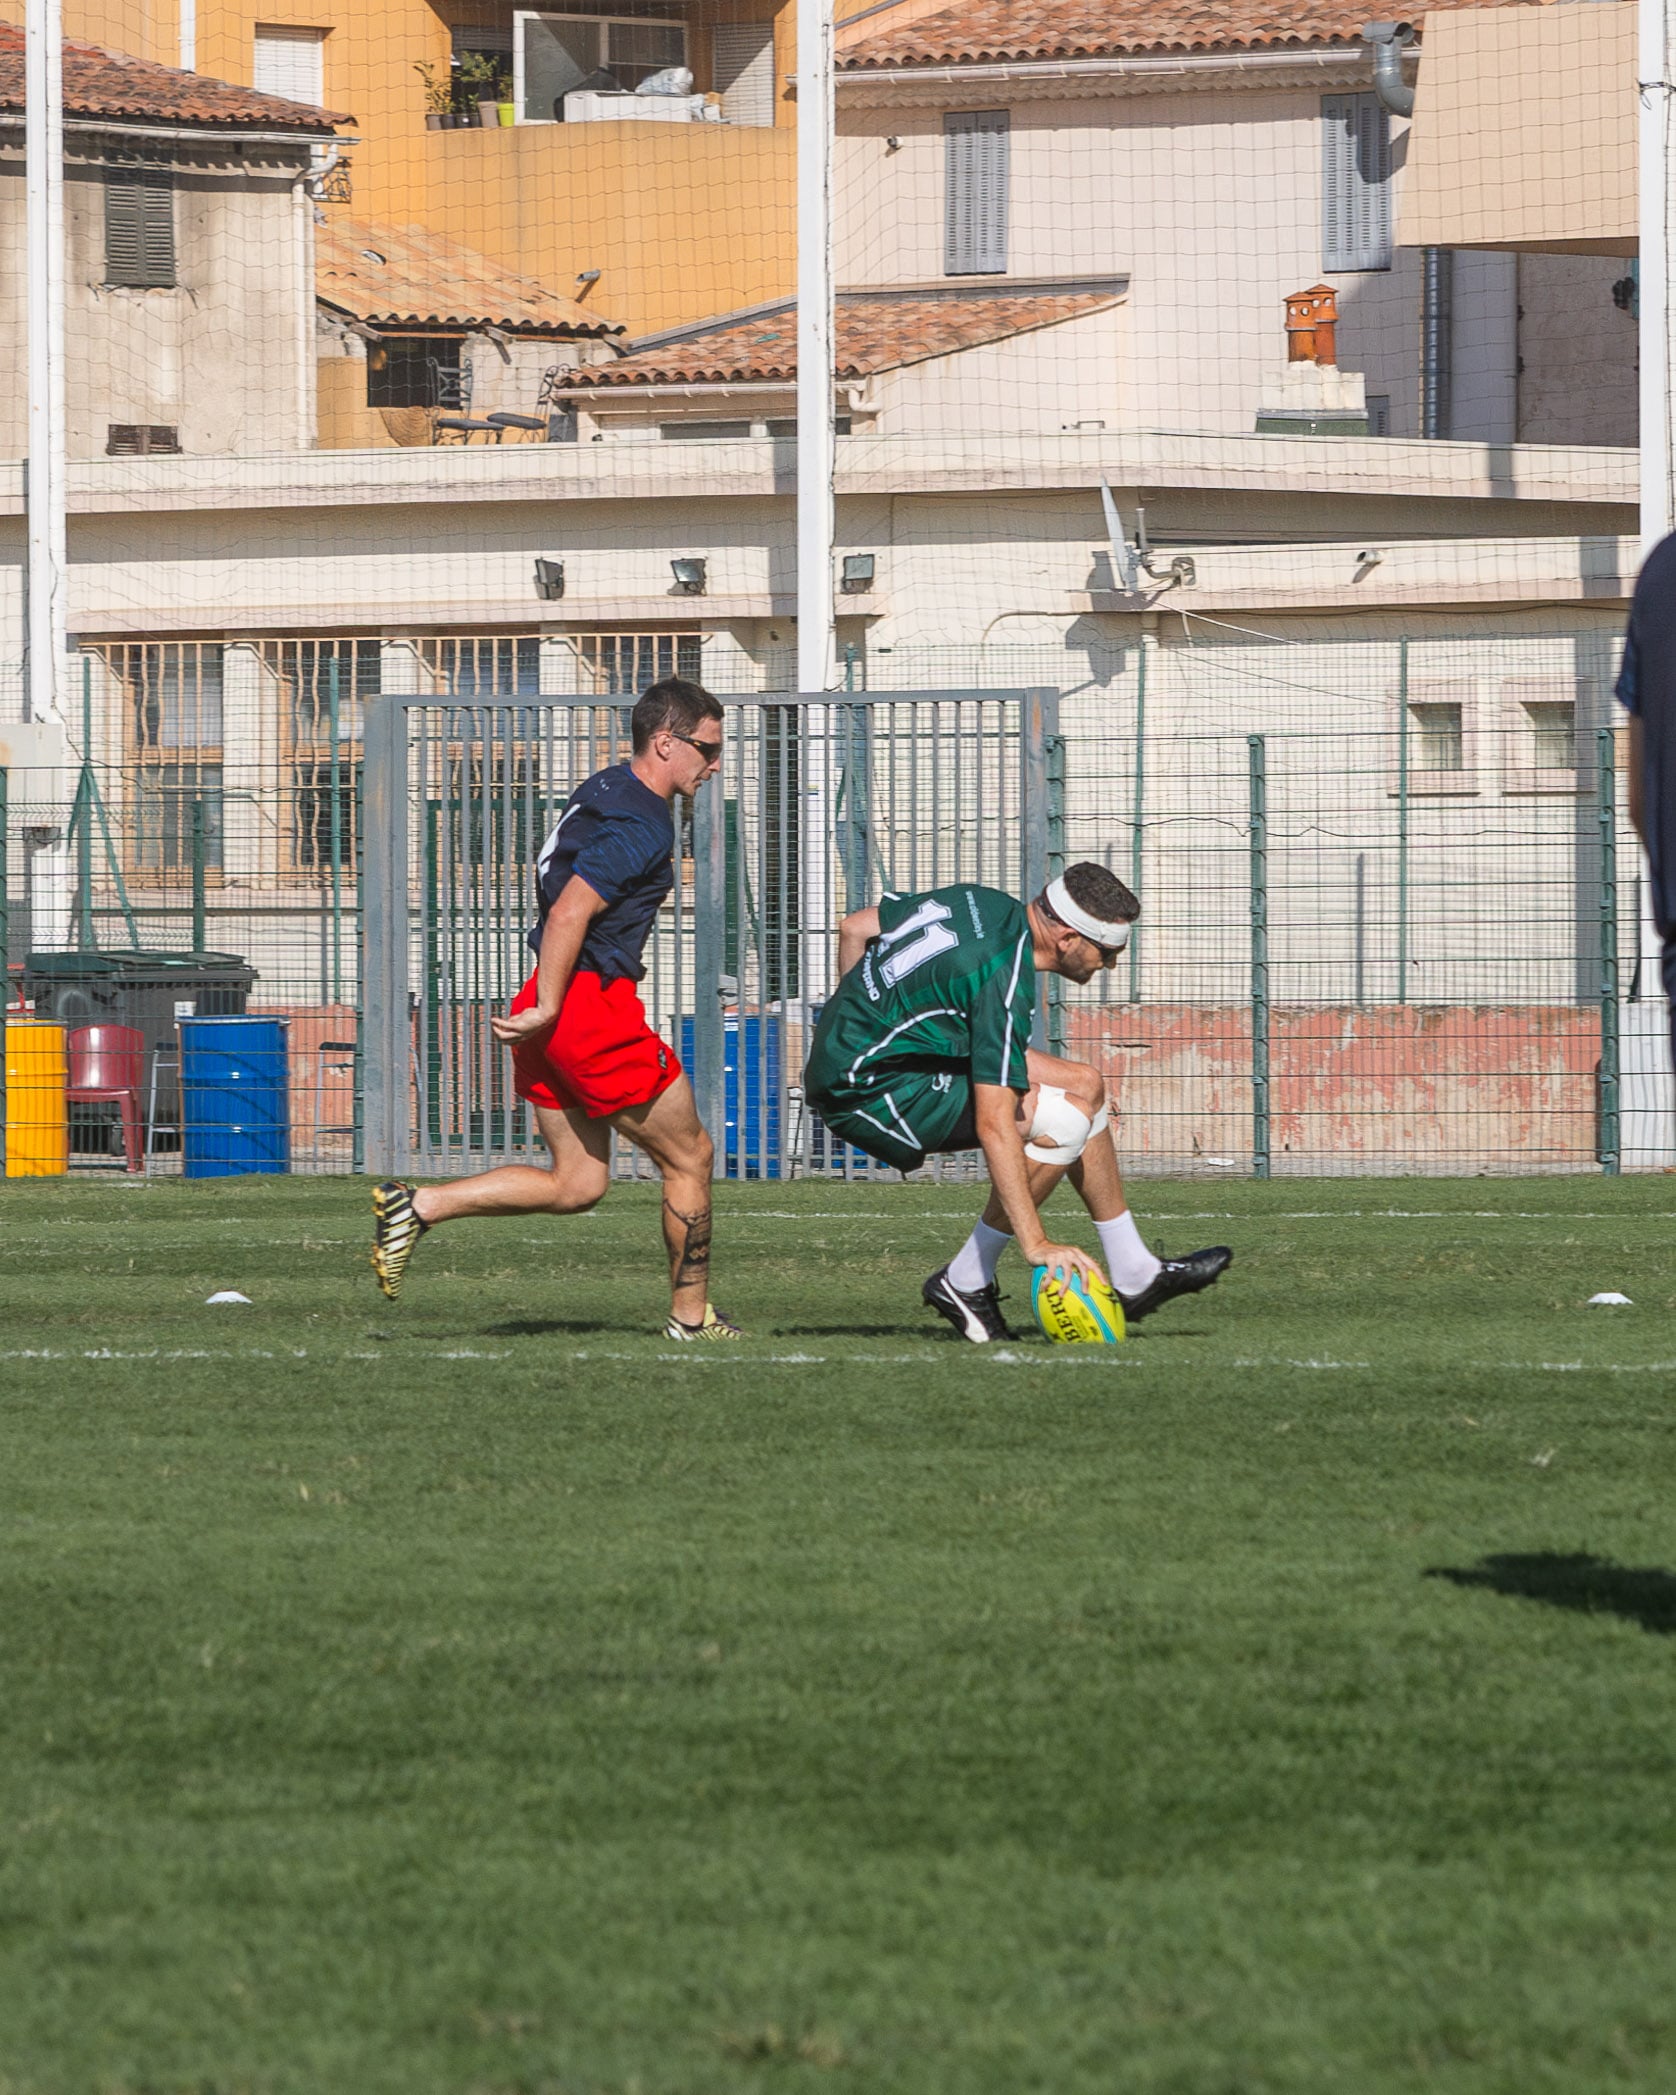 Rugby player in green kit scoring a try